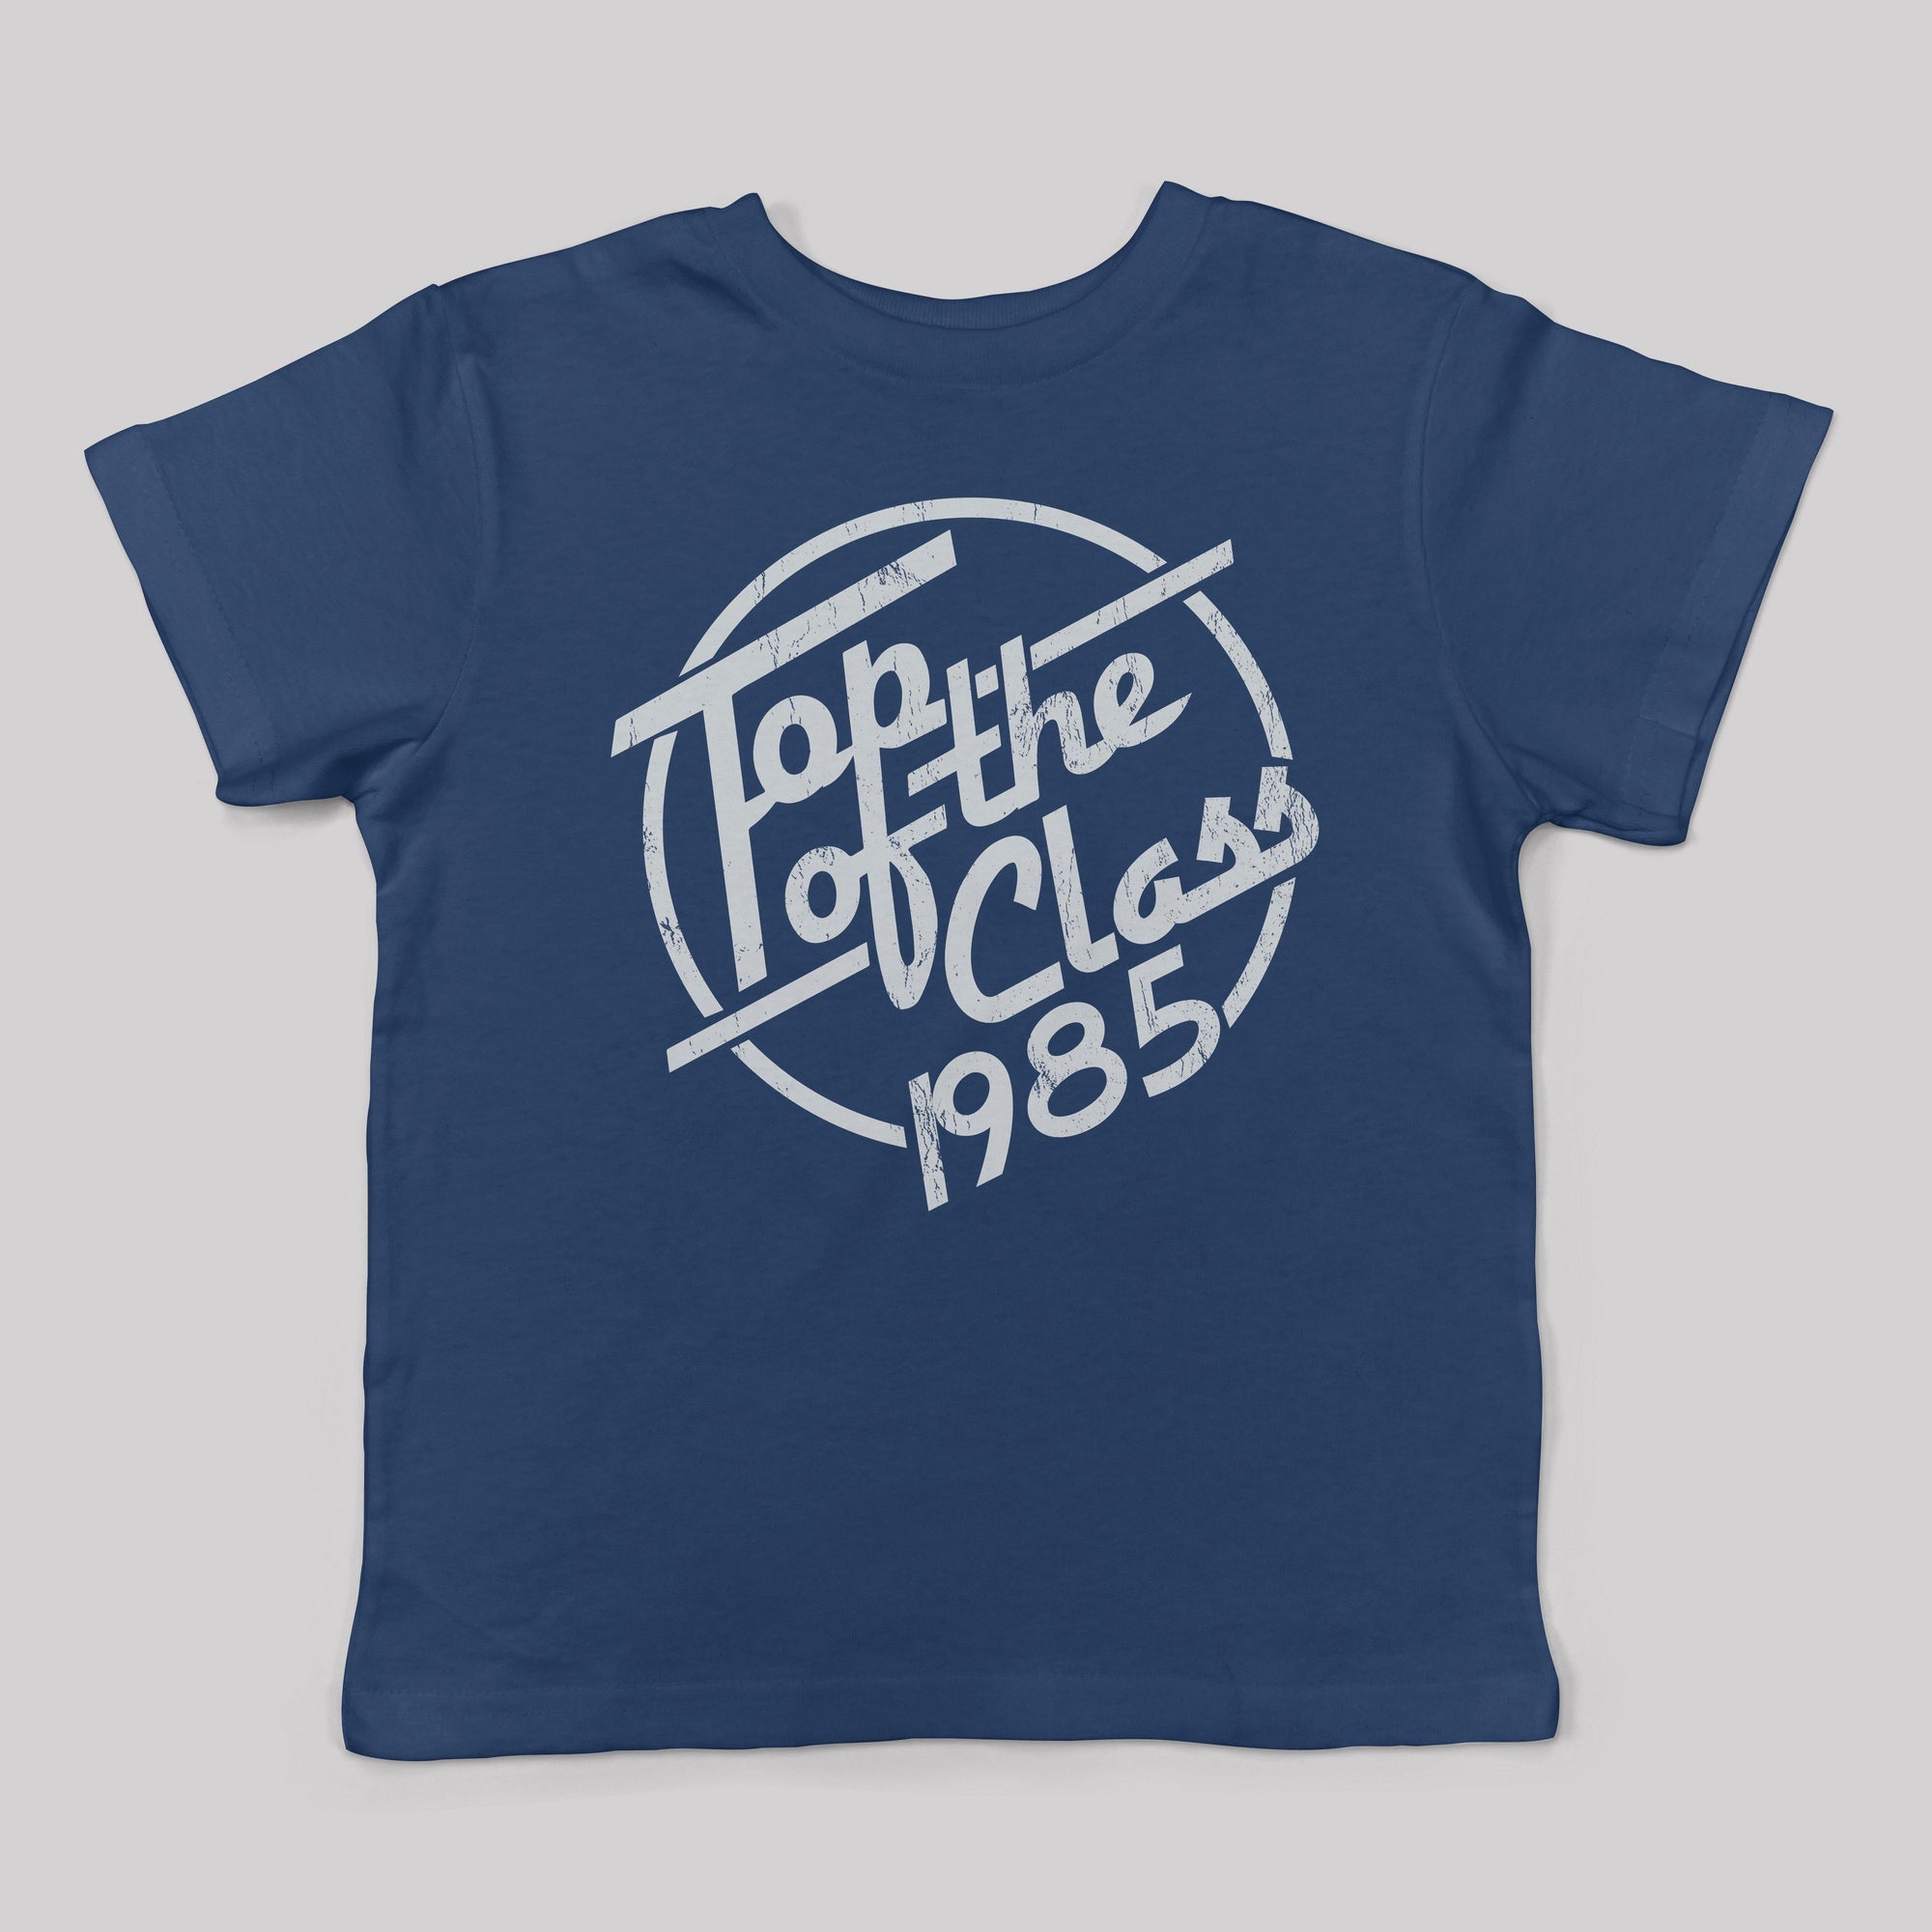 Top of the Class Kids Tee (4 Colors) - Baby Teith